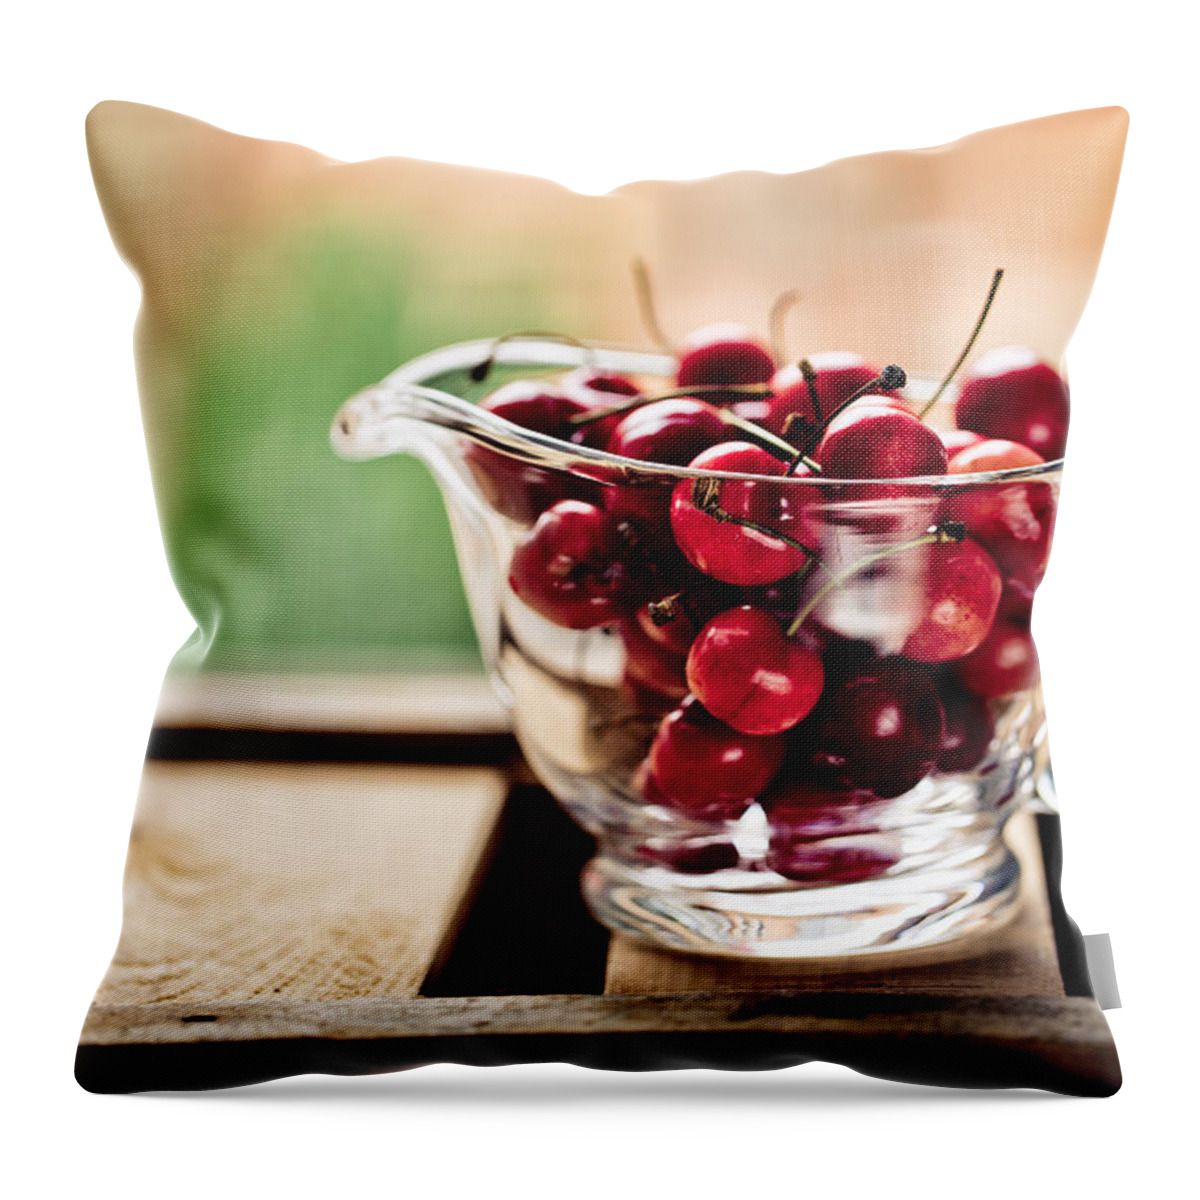 Cherry Throw Pillow featuring the photograph Cherries by Nailia Schwarz